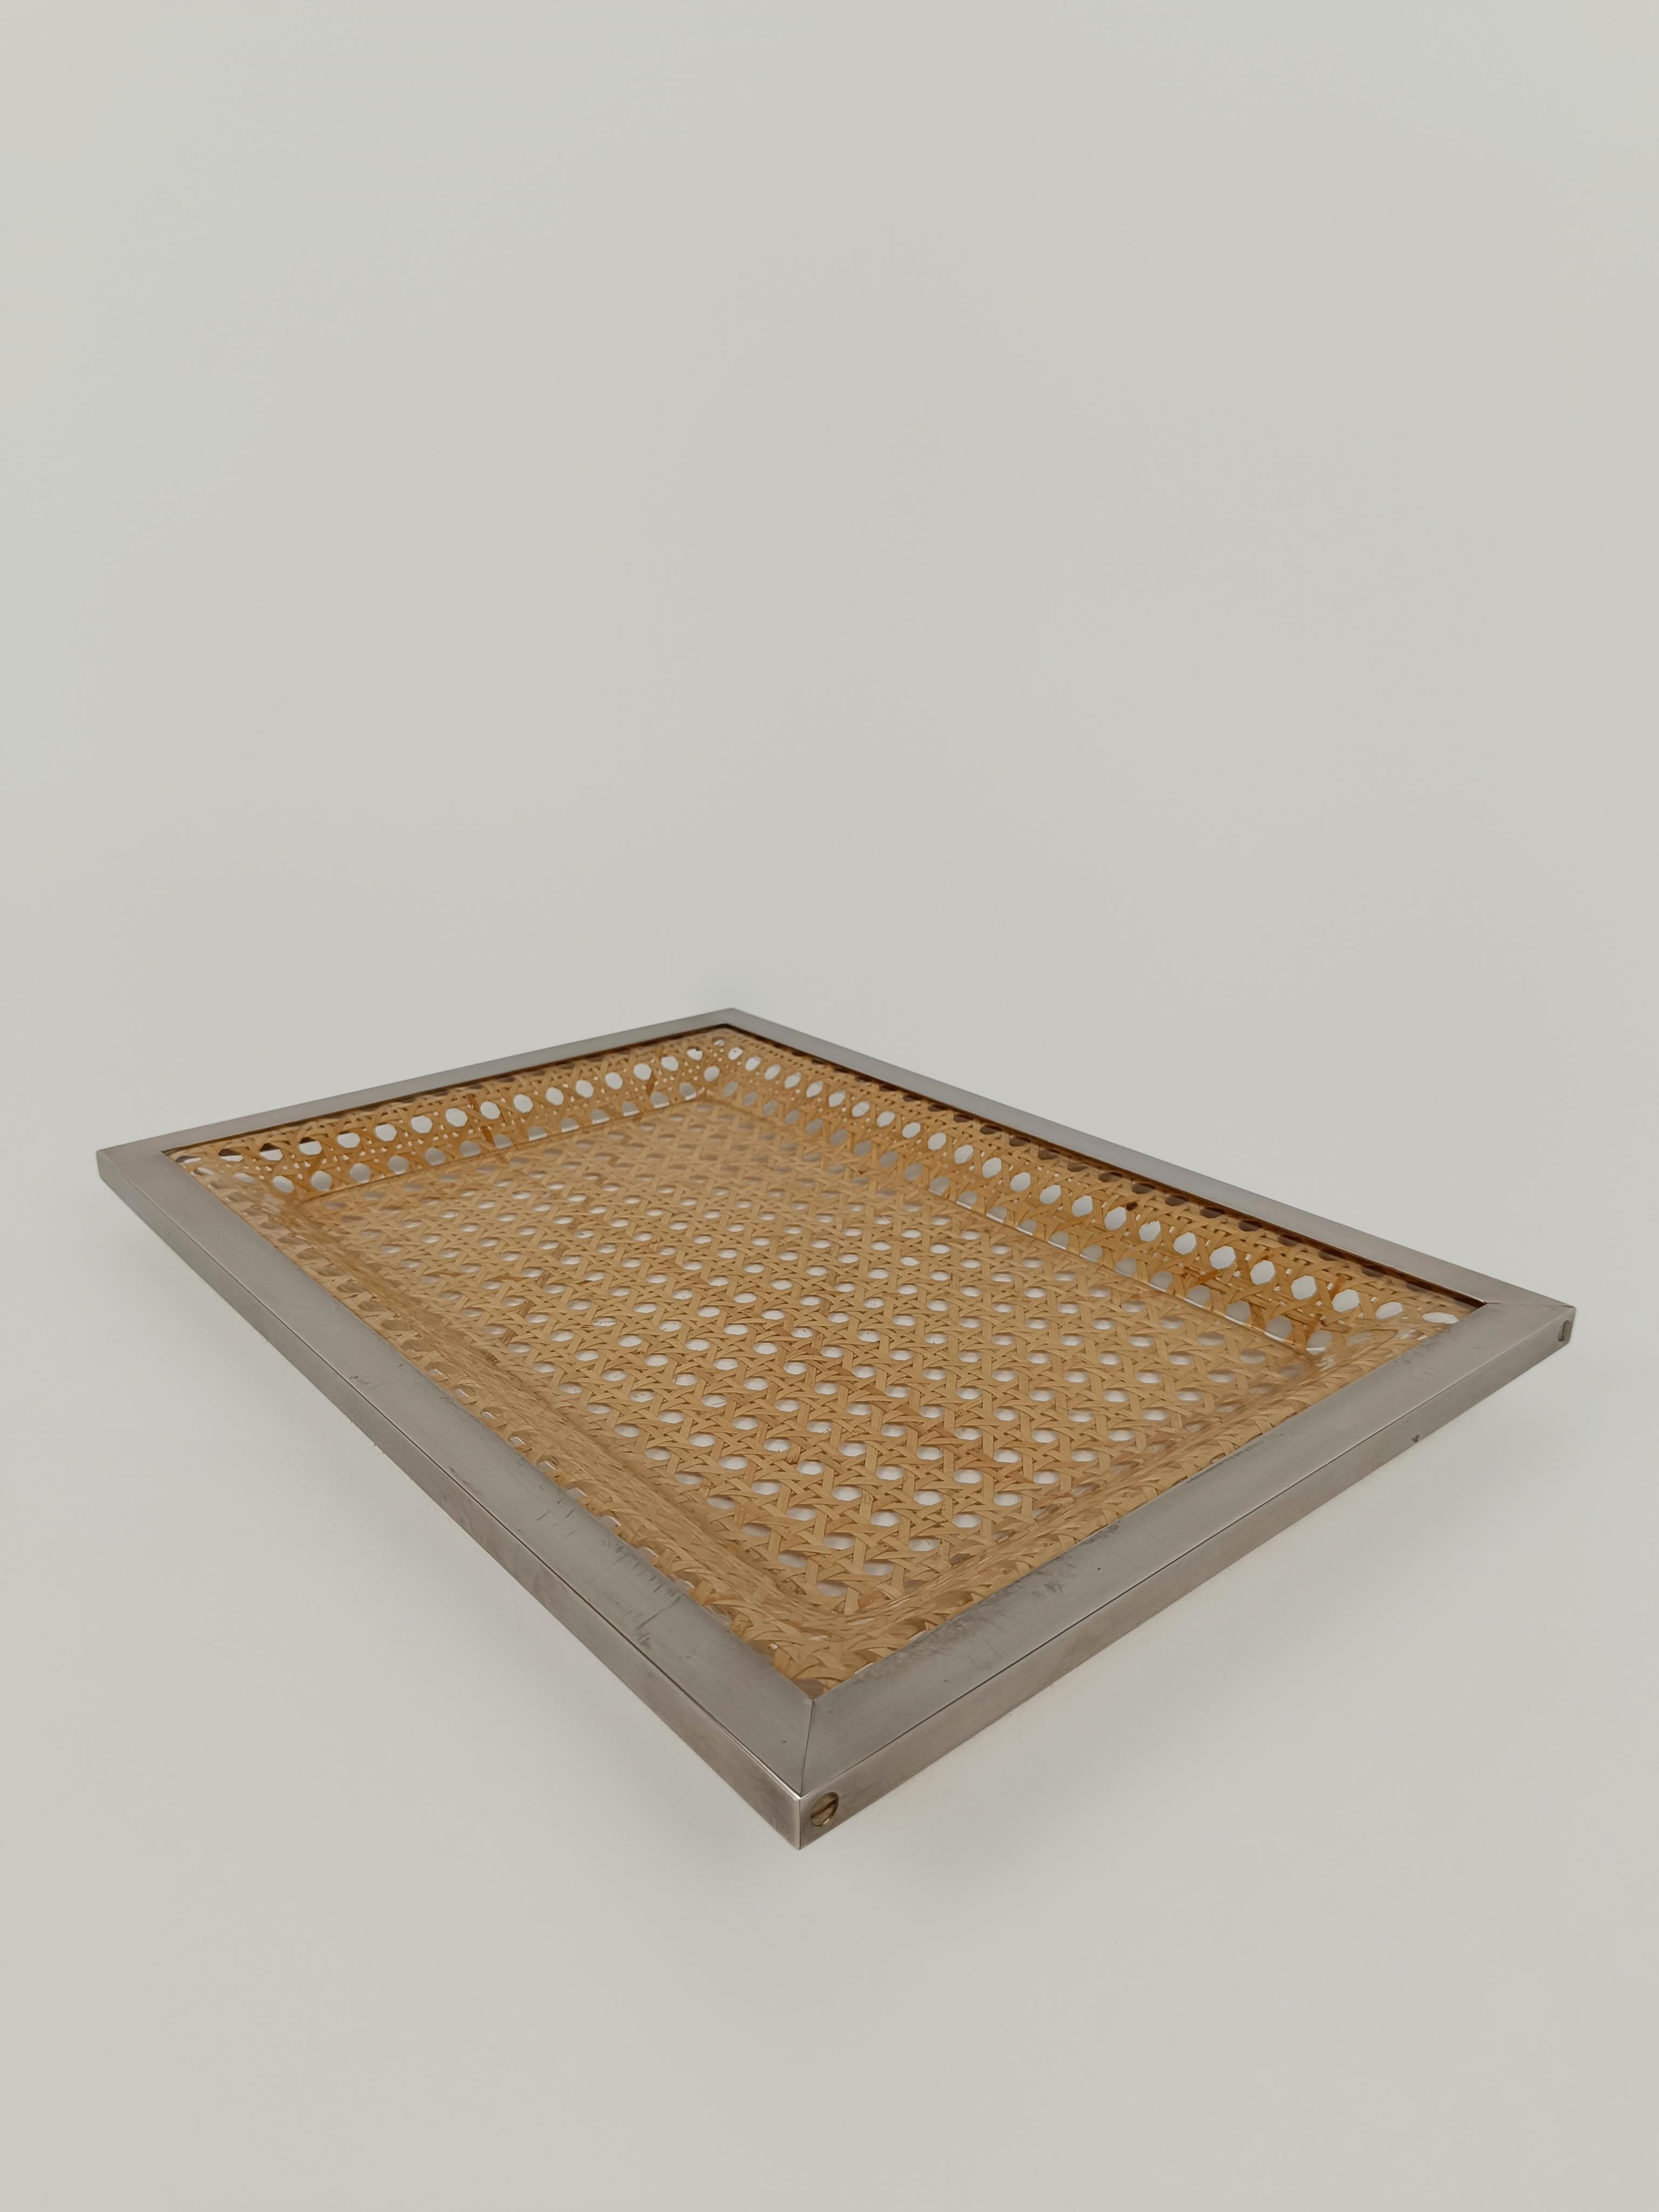 Serving Tray in Lucite, Rattan and Brass Christian Dior Style, Italy, 1970s 4